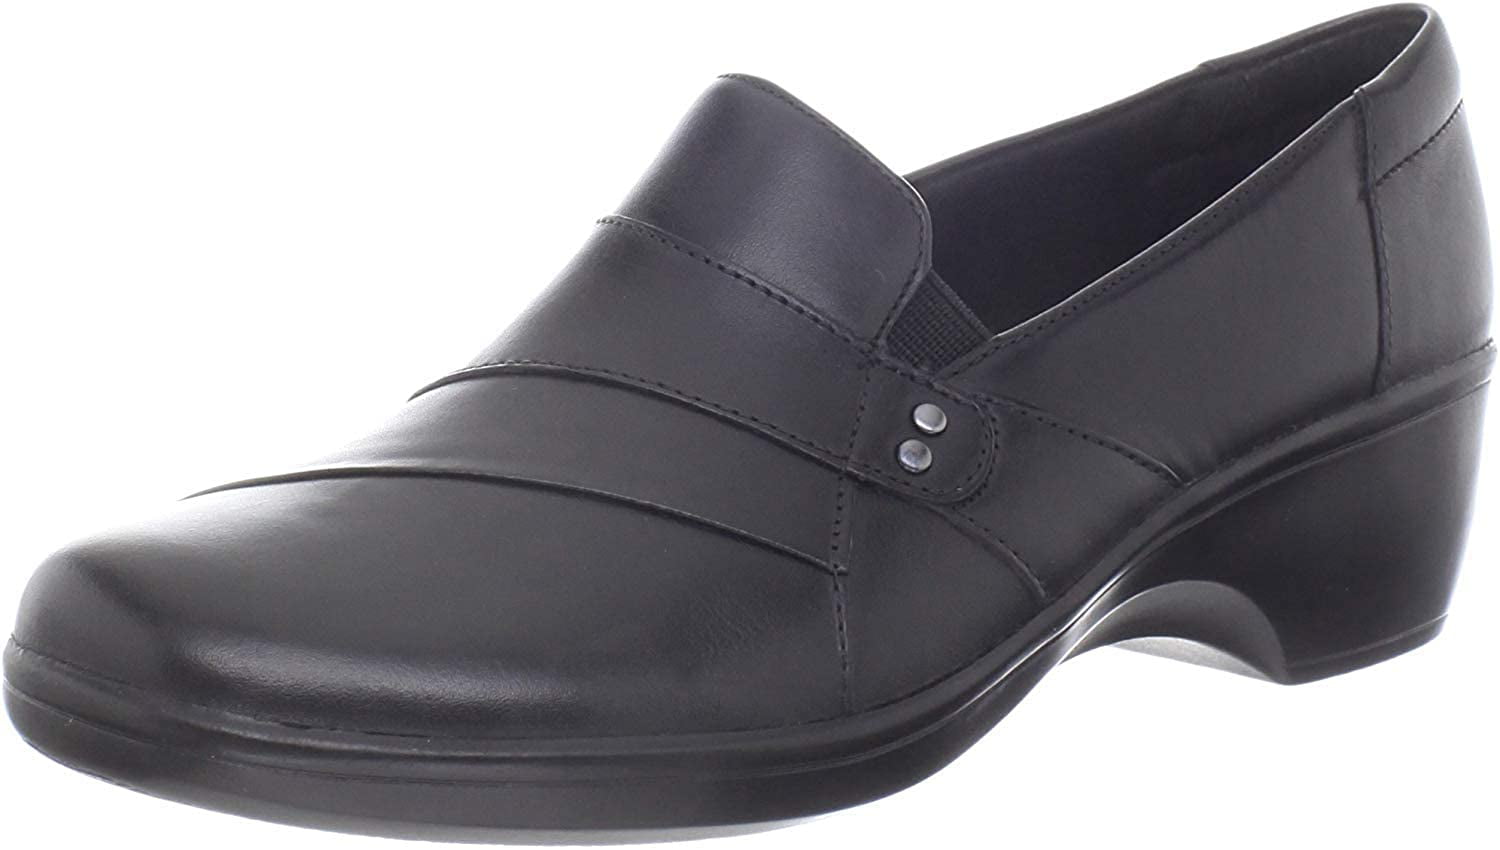 Details about   Clarks Authentic Black May Marigold Slip On Leather Loafer Comfort Shoes New